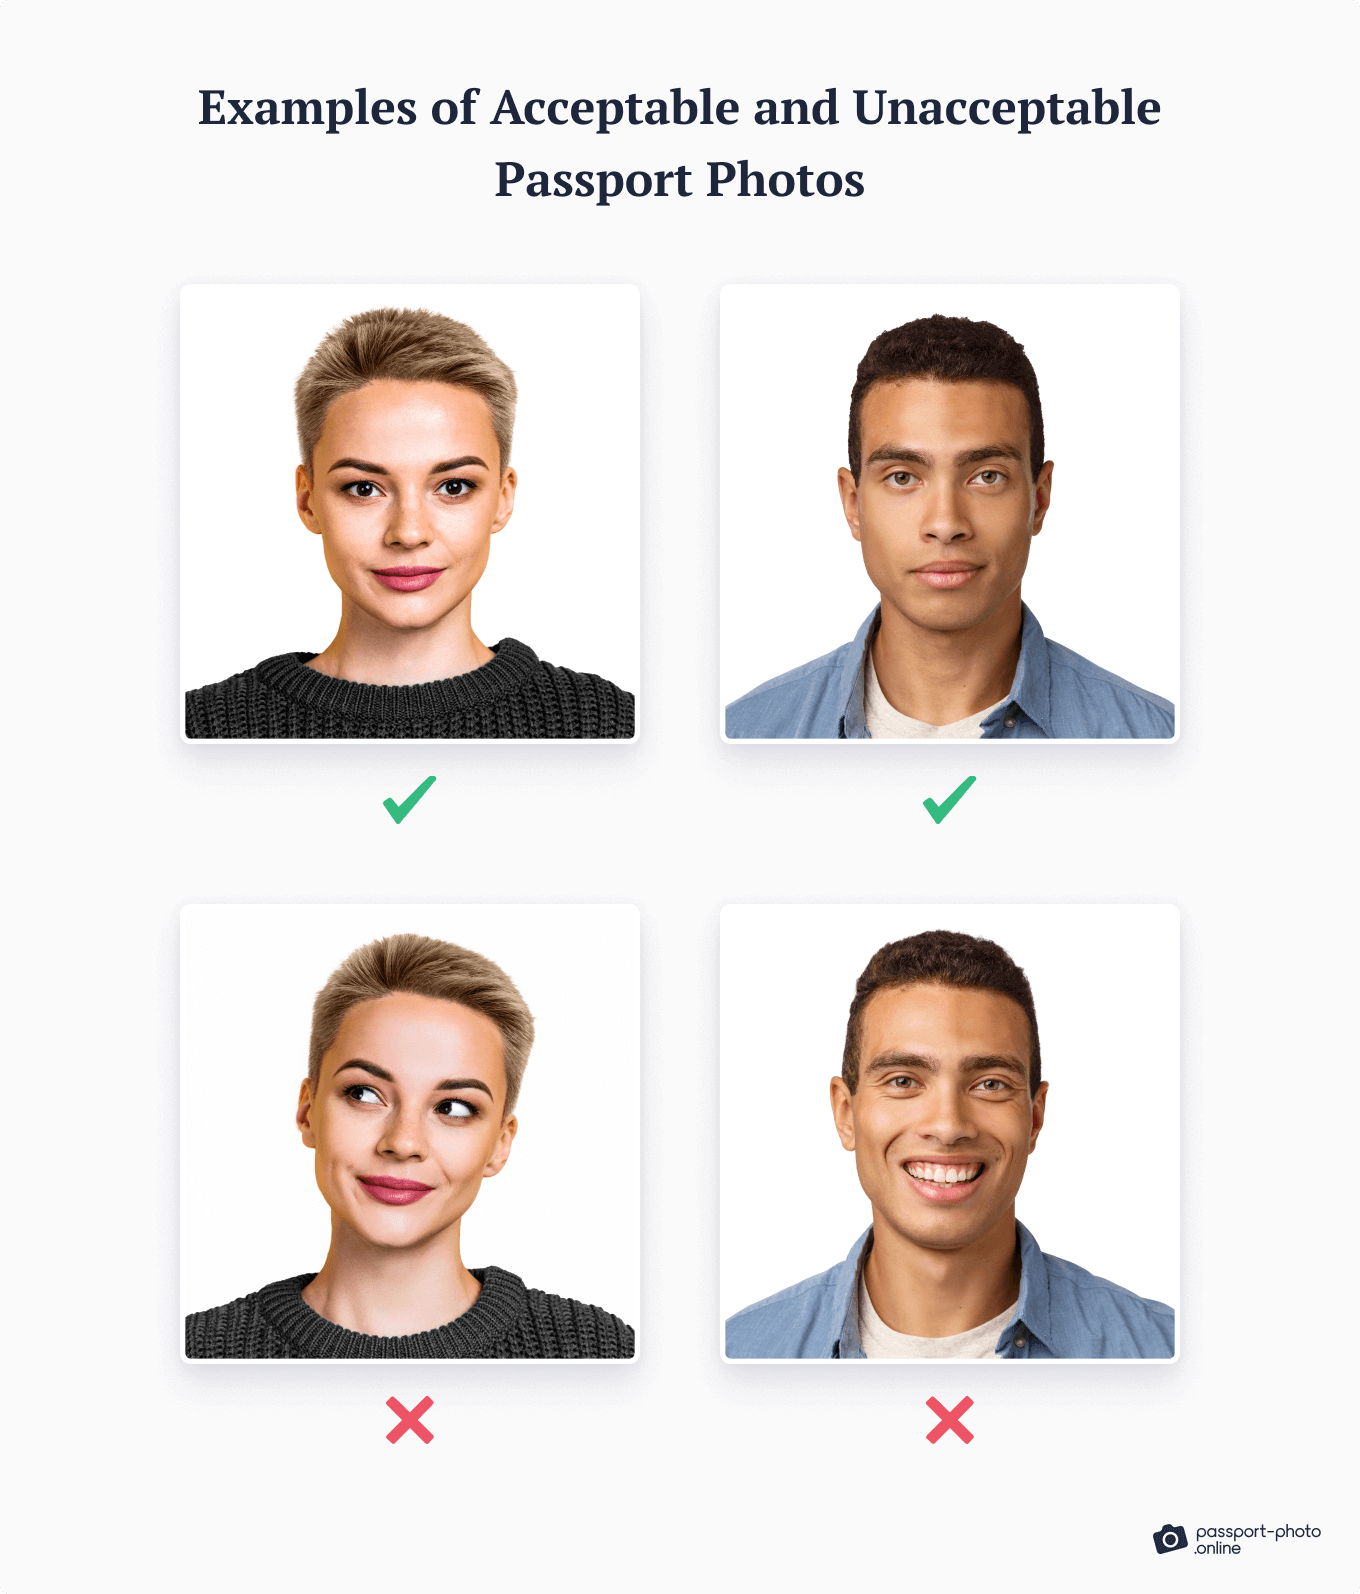 Examples of acceptable and unacceptable passport photos.